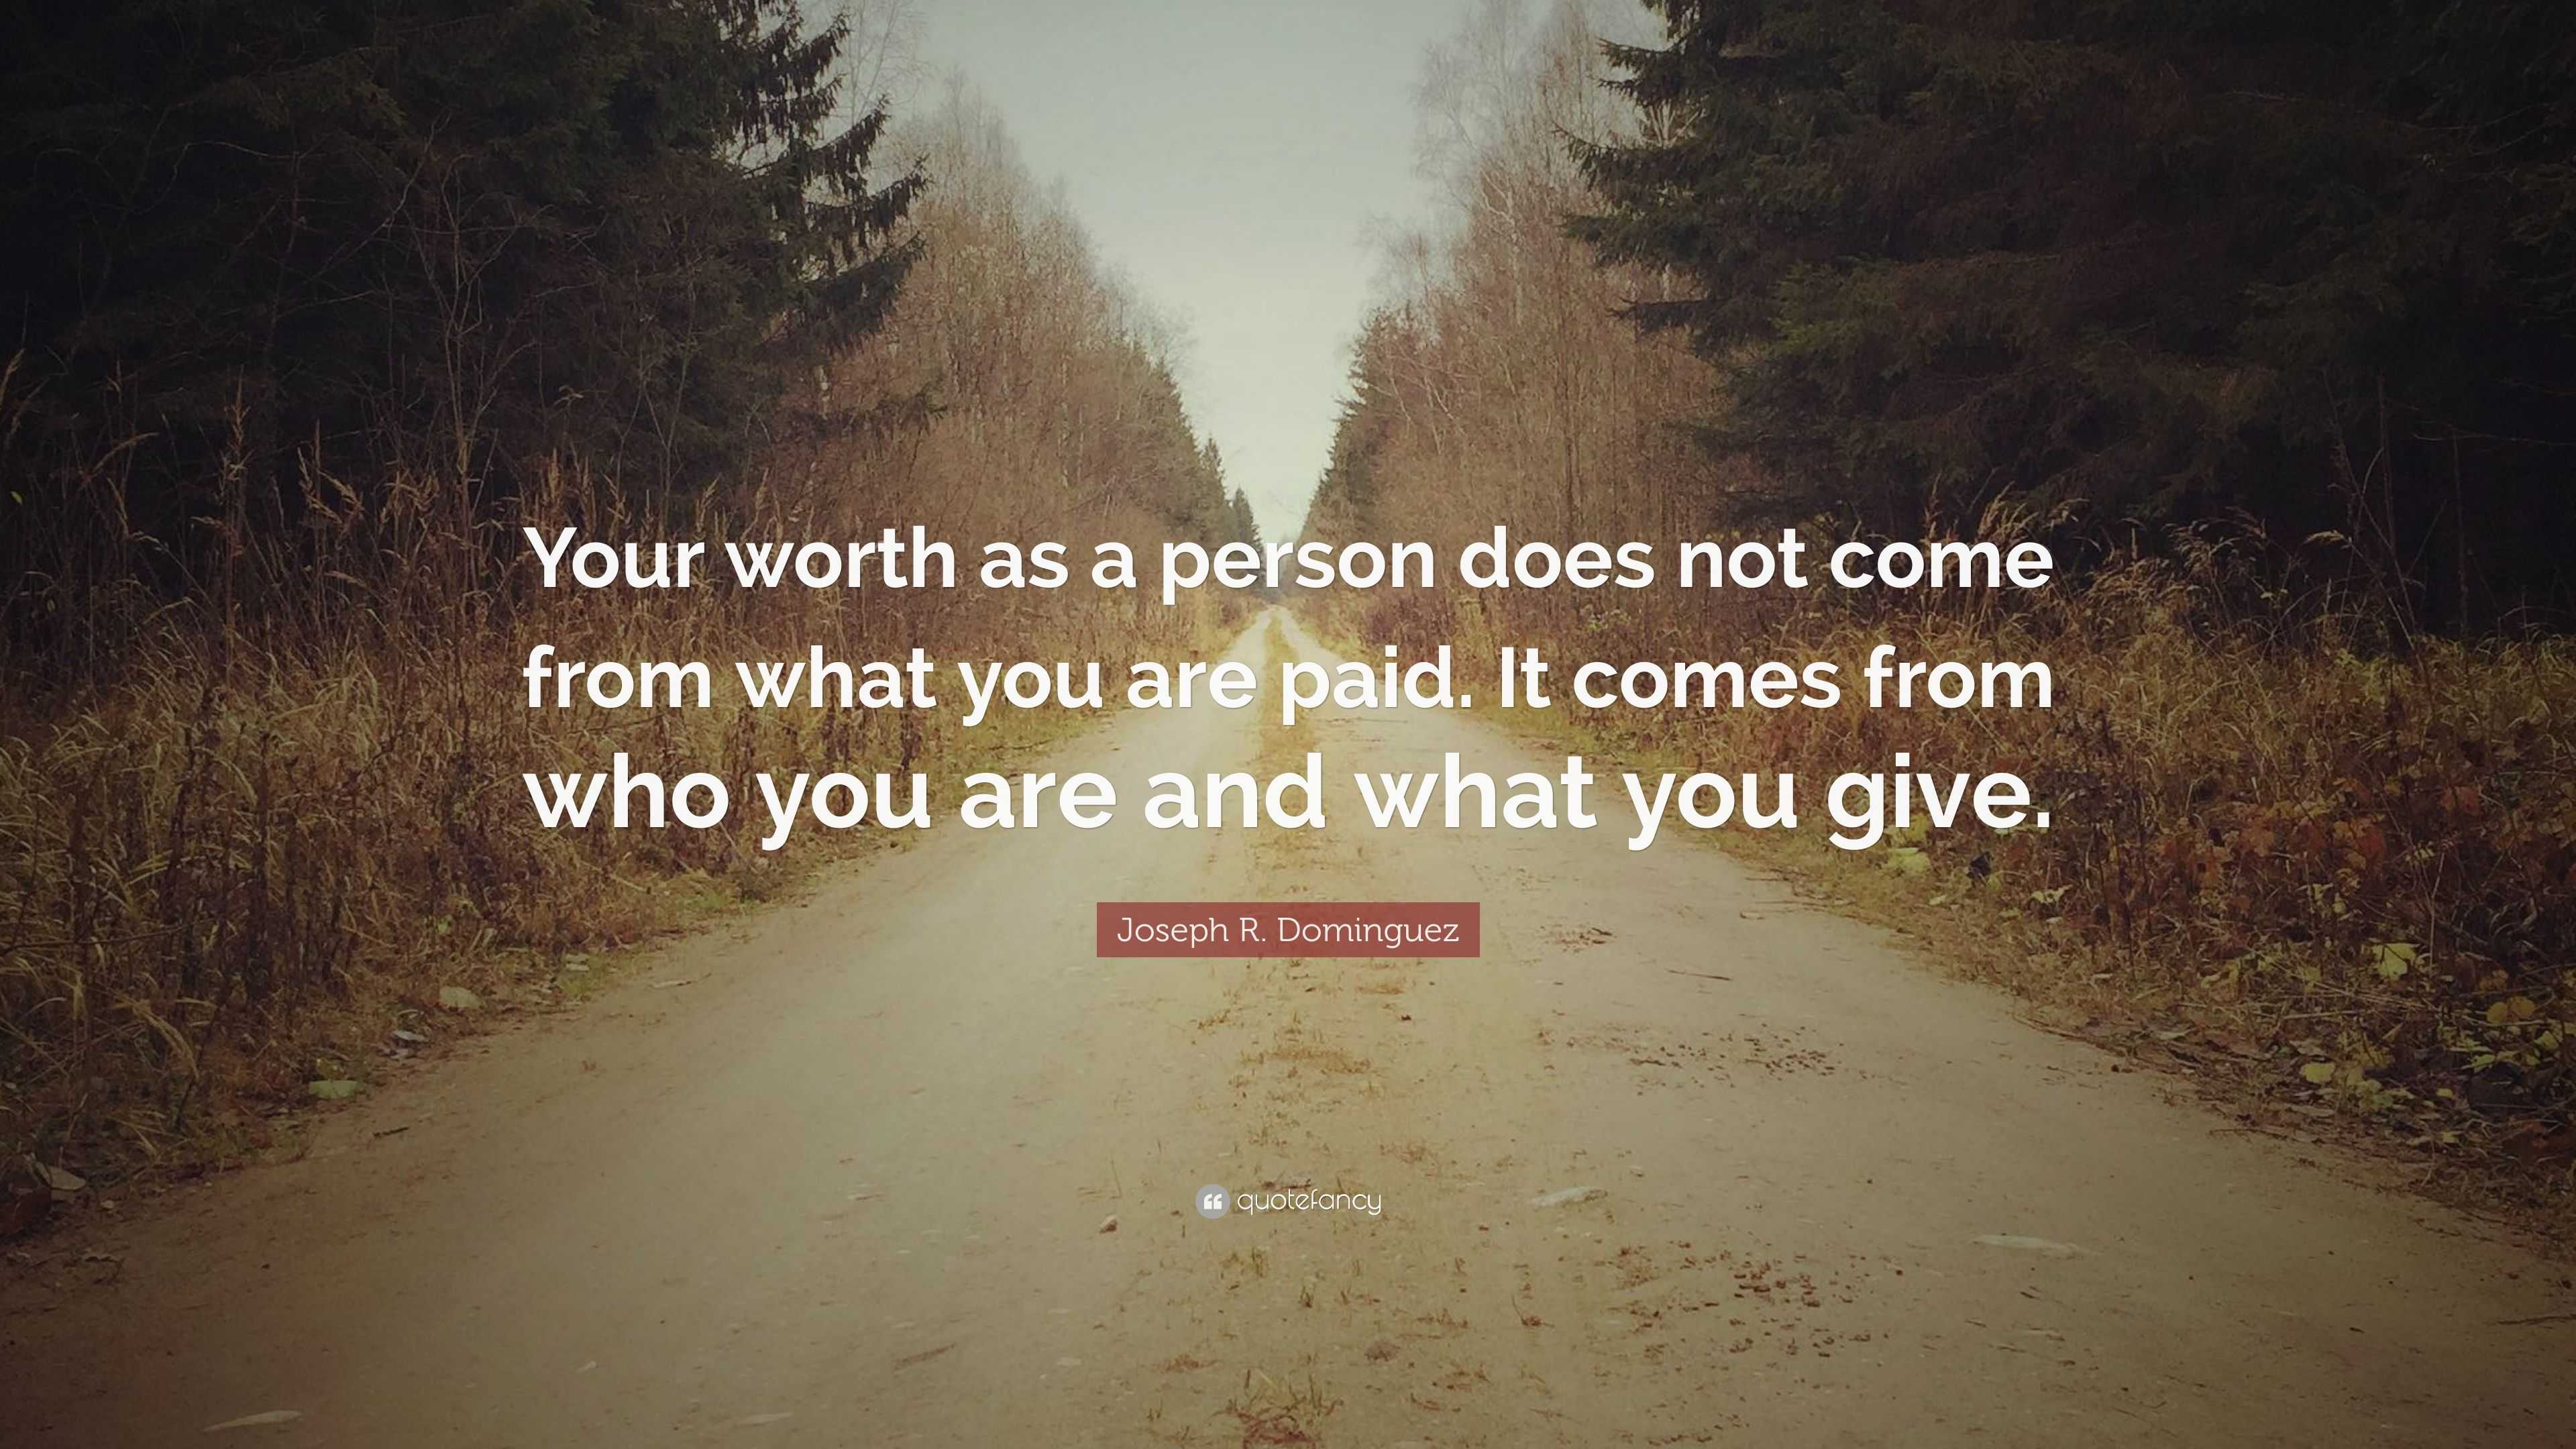 Joseph R. Dominguez Quote: “Your worth as a person does not come from ...